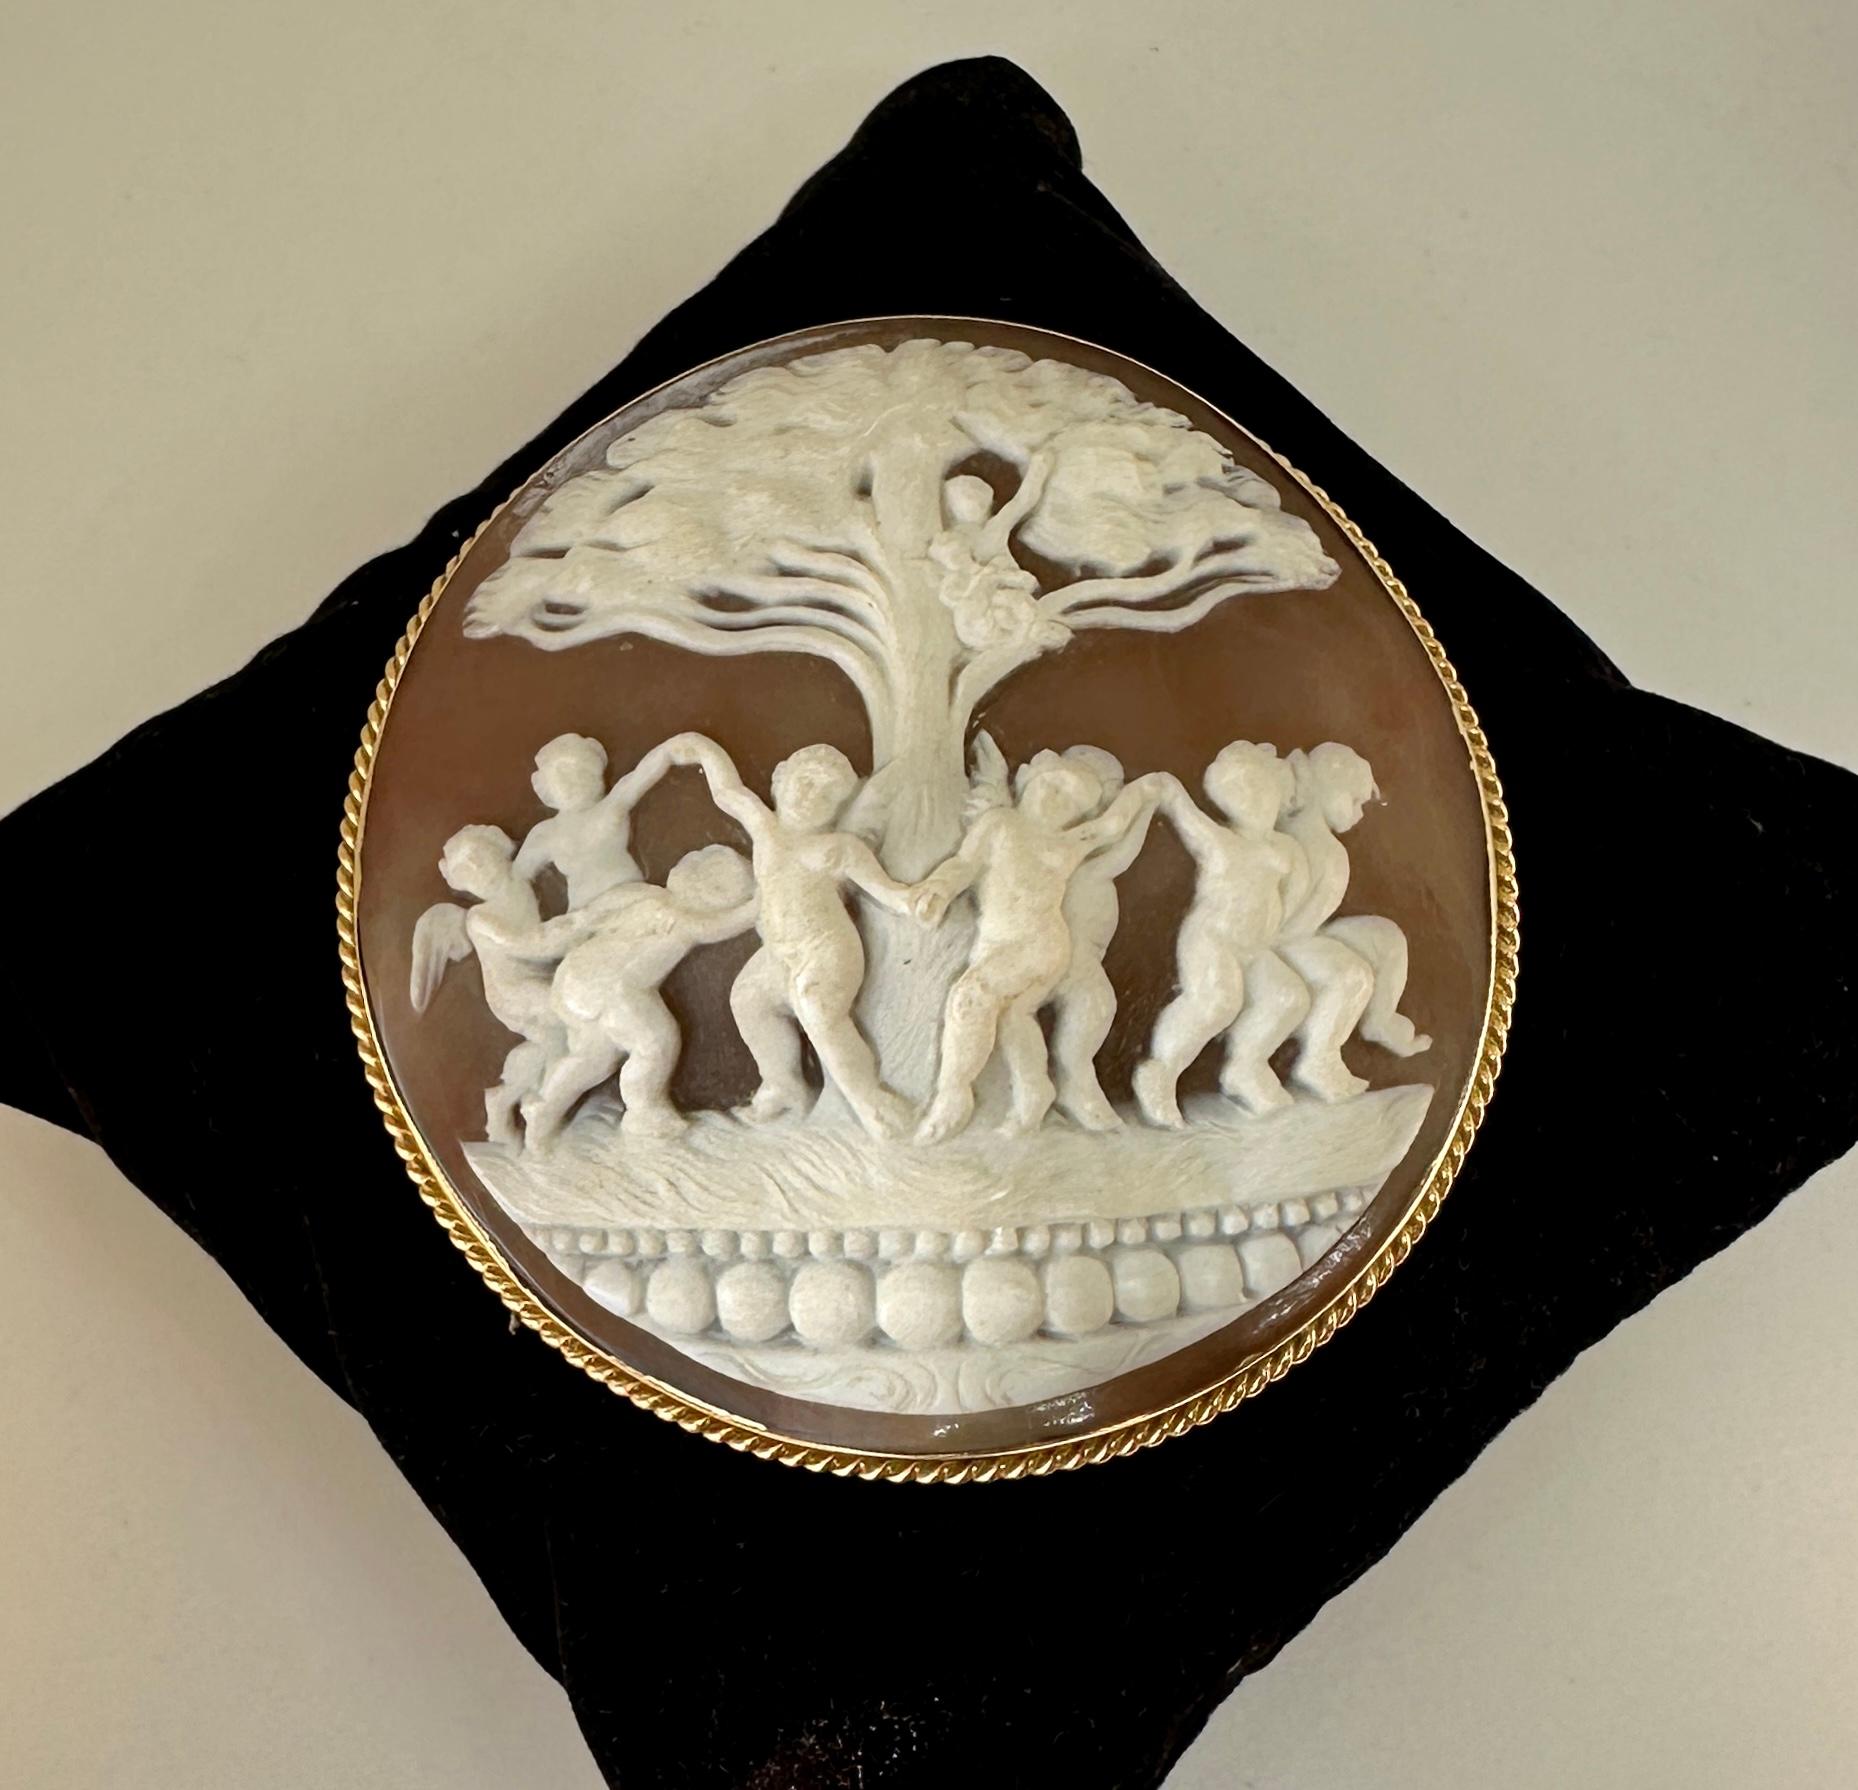 This is an absolutely stunning and very rare large 2.5 inch tall antique Shell Cameo Pendant Brooch Pin with a hand carved image of eight Cherubs, Angels, Putti, Cupids dancing around a tree with two cherubs playing instruments sitting in the tree. 